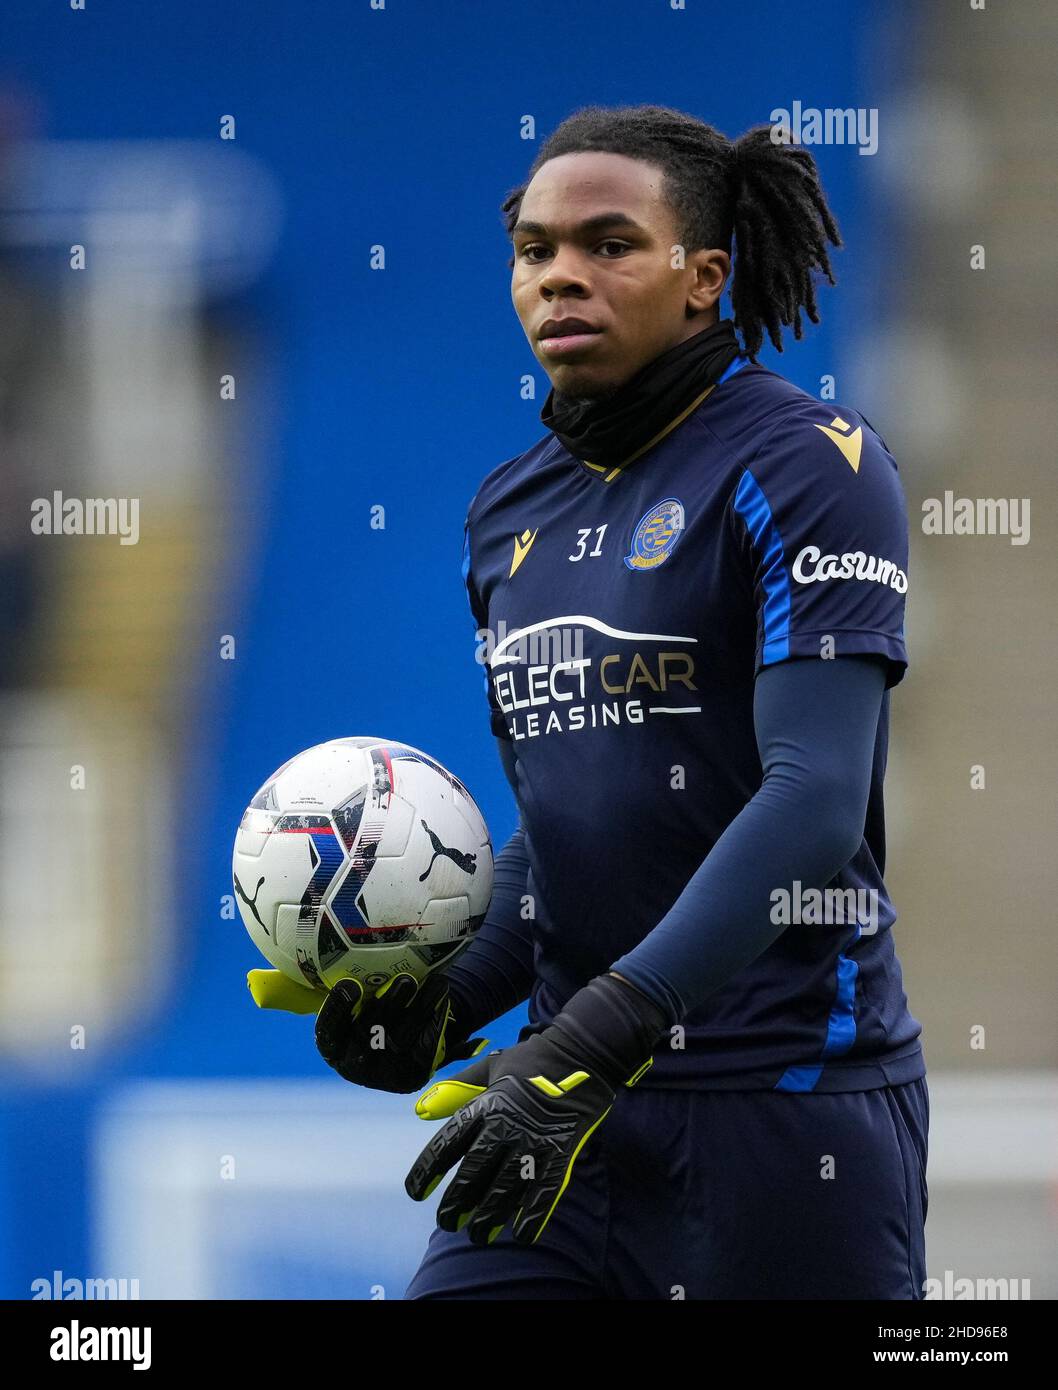 https://c8.alamy.com/comp/2HD96E8/reading-uk-03rd-jan-2022-goalkeeper-coniah-boyce-clarke-of-reading-pre-match-during-the-sky-bet-championship-match-between-reading-and-derby-county-at-the-madejski-stadium-reading-england-on-3-january-2022-photo-by-andy-rowland-credit-prime-media-imagesalamy-live-news-2HD96E8.jpg